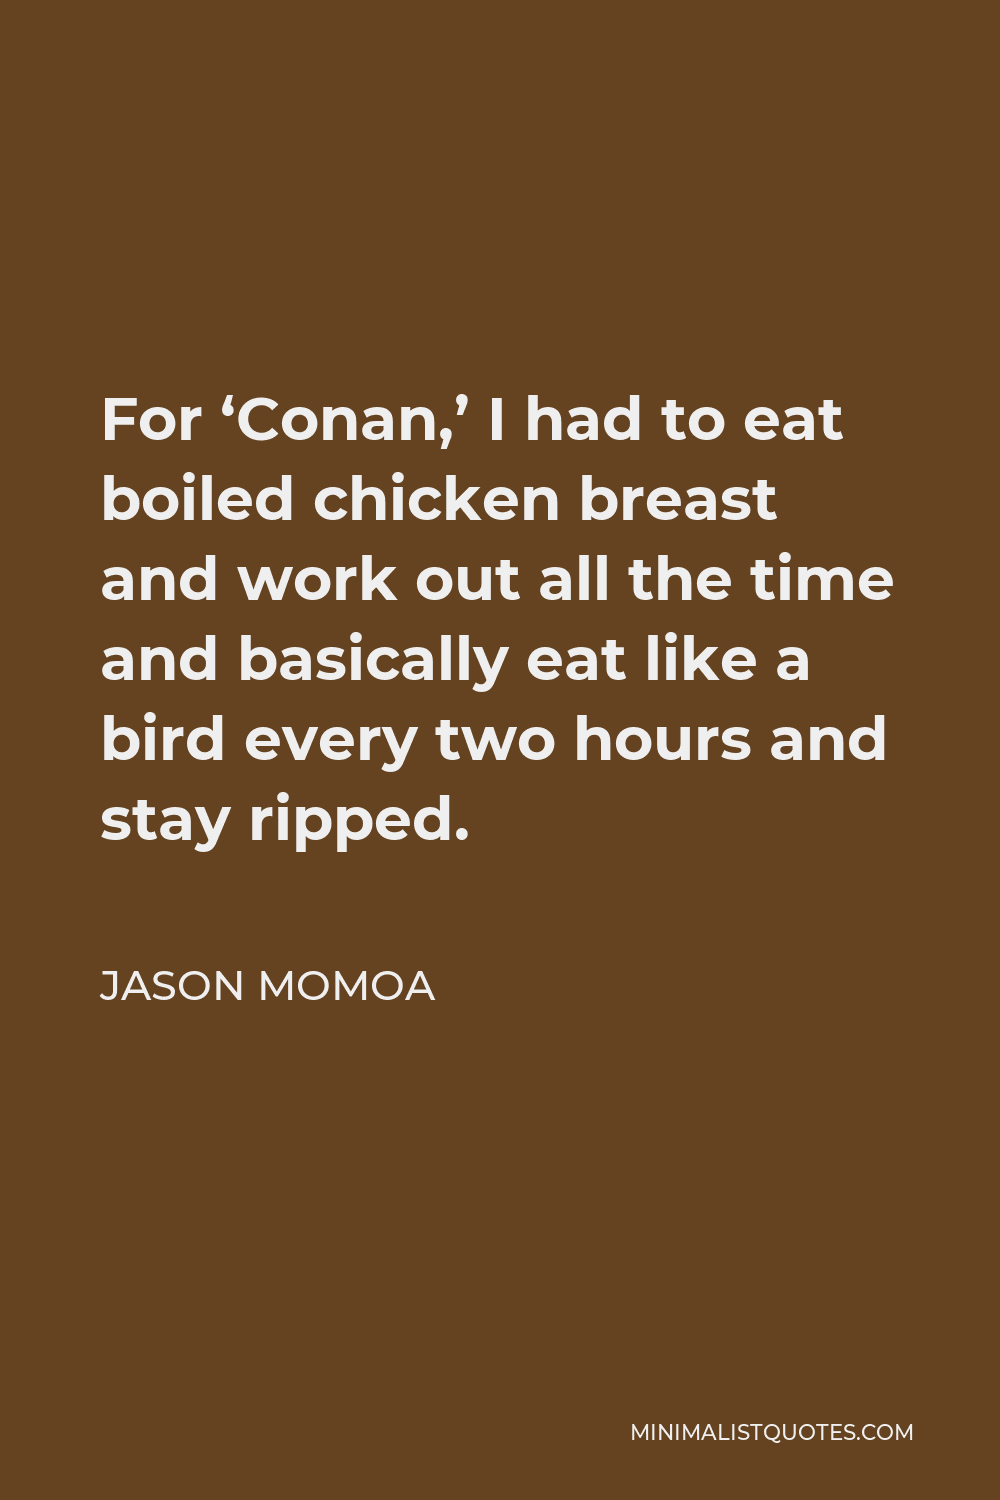 Jason Momoa Quote - For ‘Conan,’ I had to eat boiled chicken breast and work out all the time and basically eat like a bird every two hours and stay ripped.